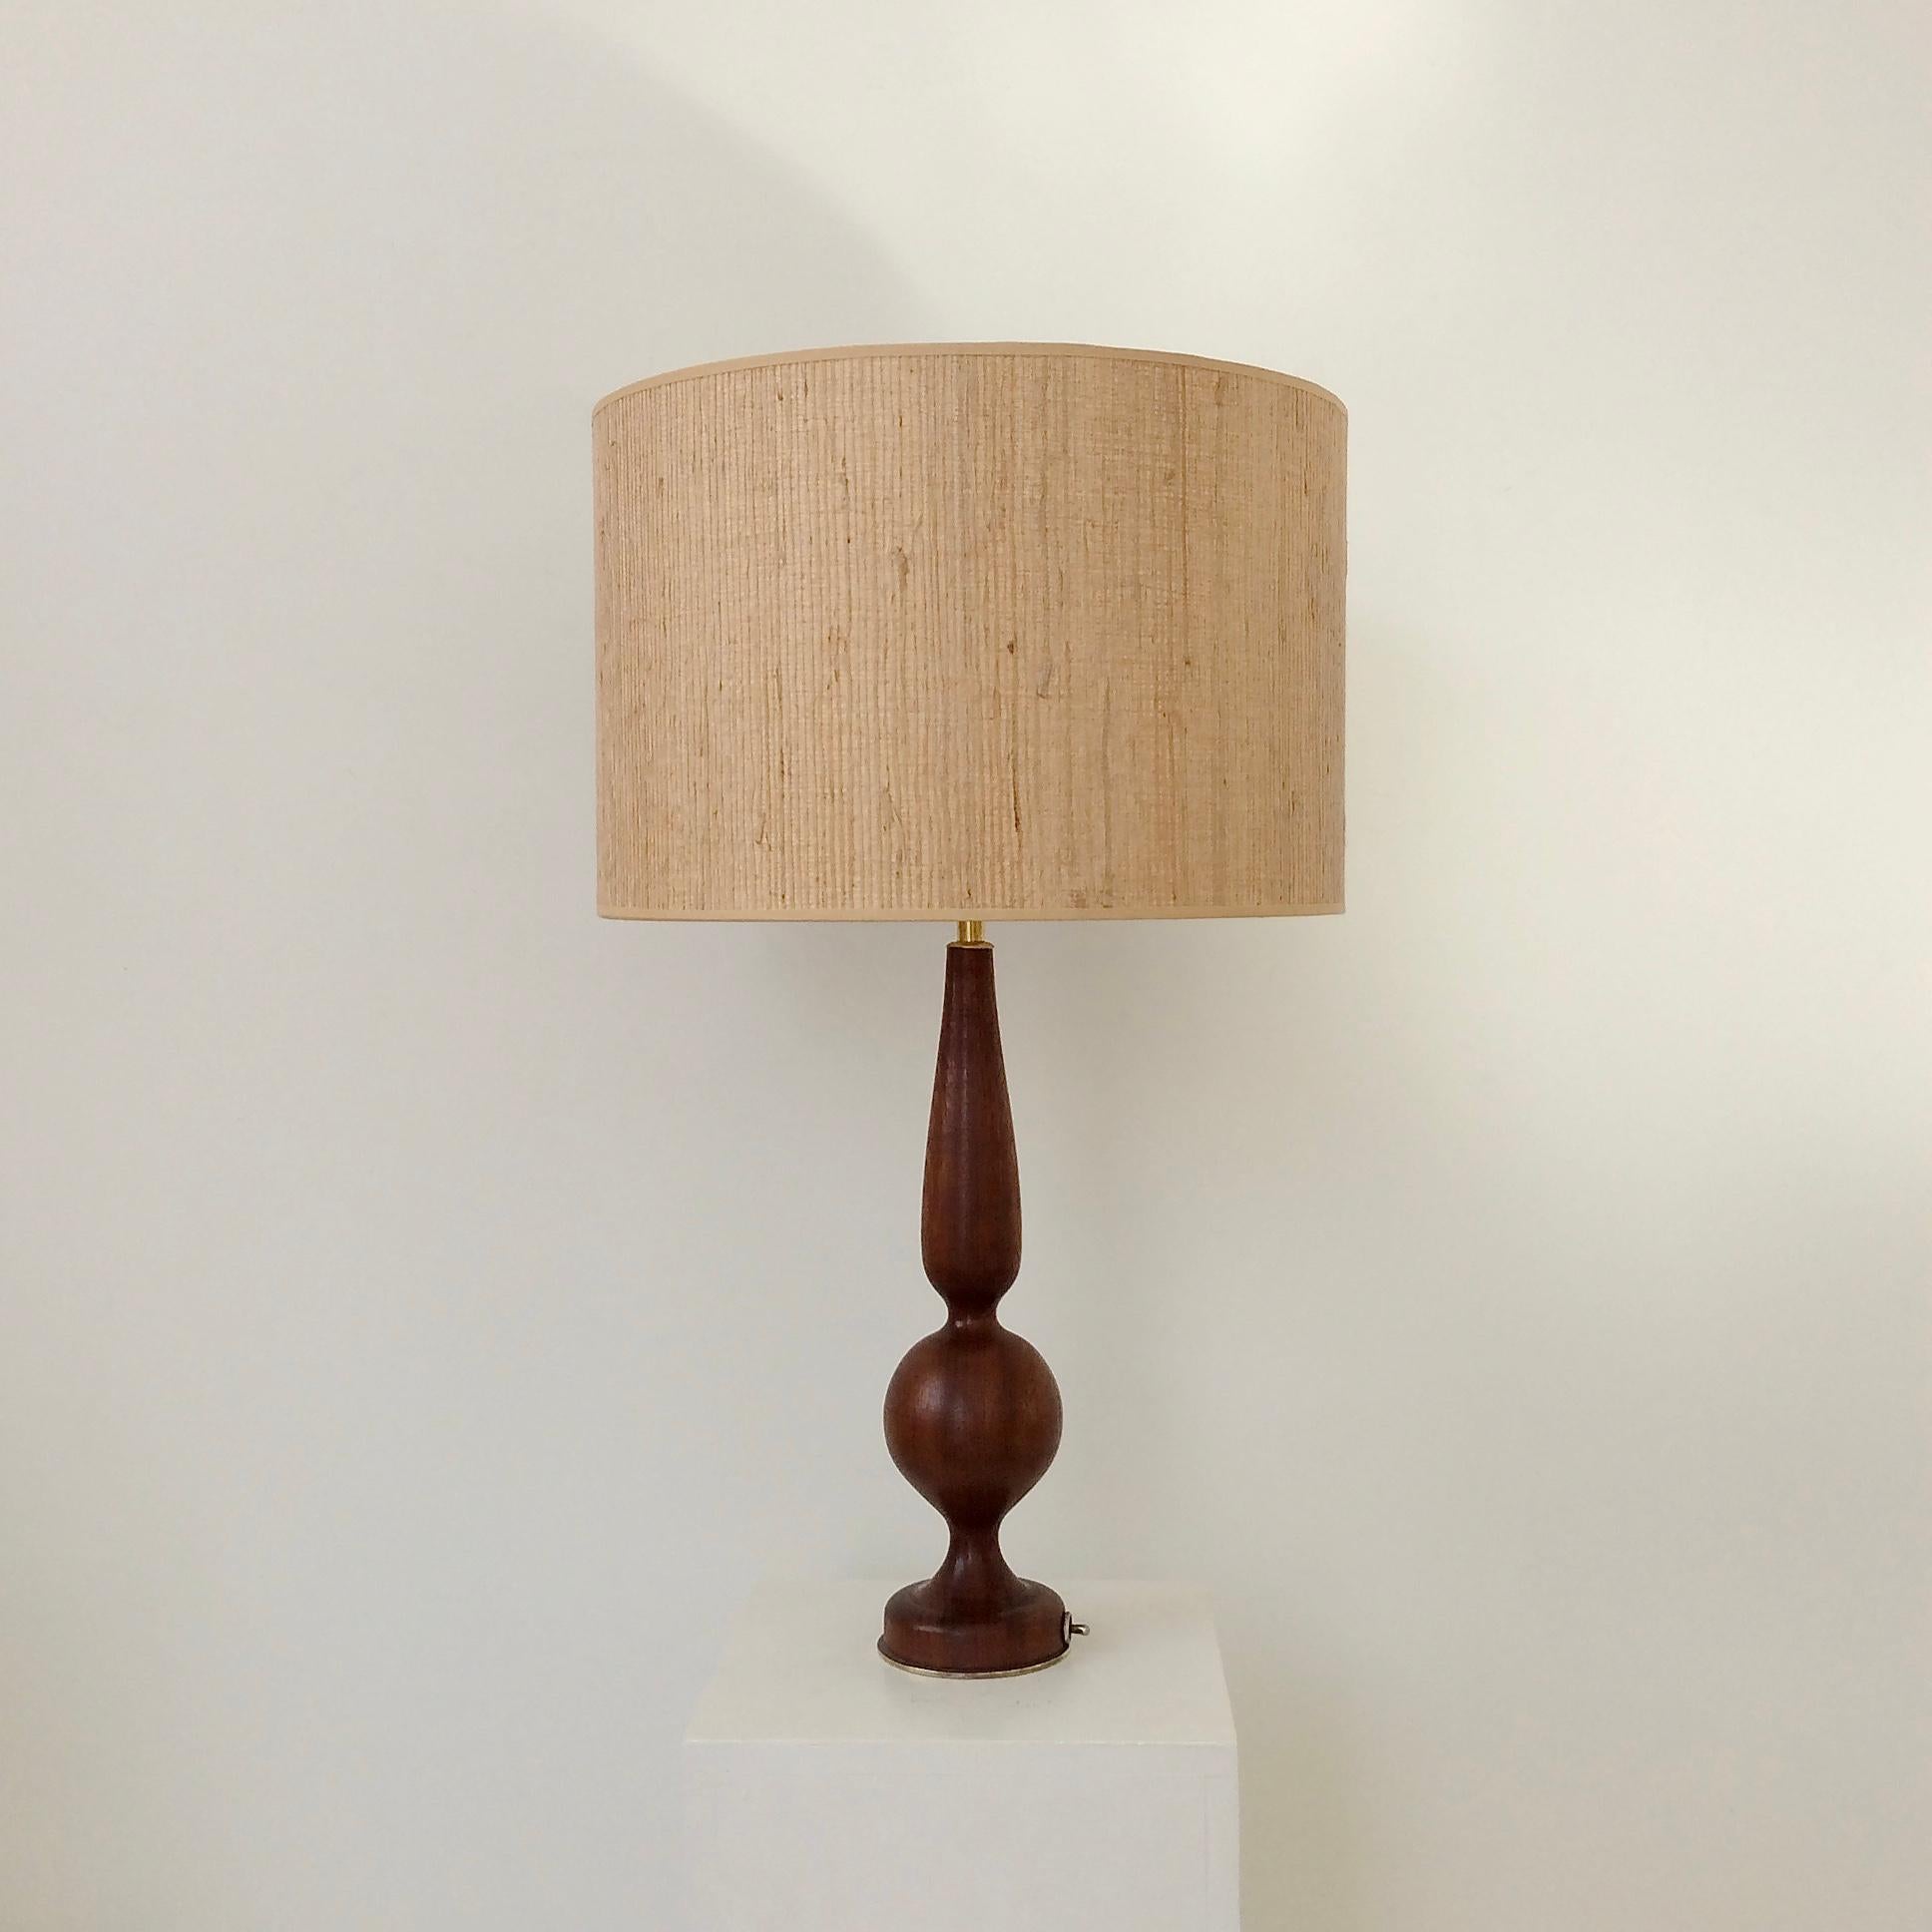 Elegant mid-century table lamp, circa 1970, Italy.
Turned wood, straw shade, brass details.
One E27 bulb .
Dimensions: 61 cm height, diameter: 37 cm
All purchases are covered by our buyer protection guarantee.
This item can be returned within 7